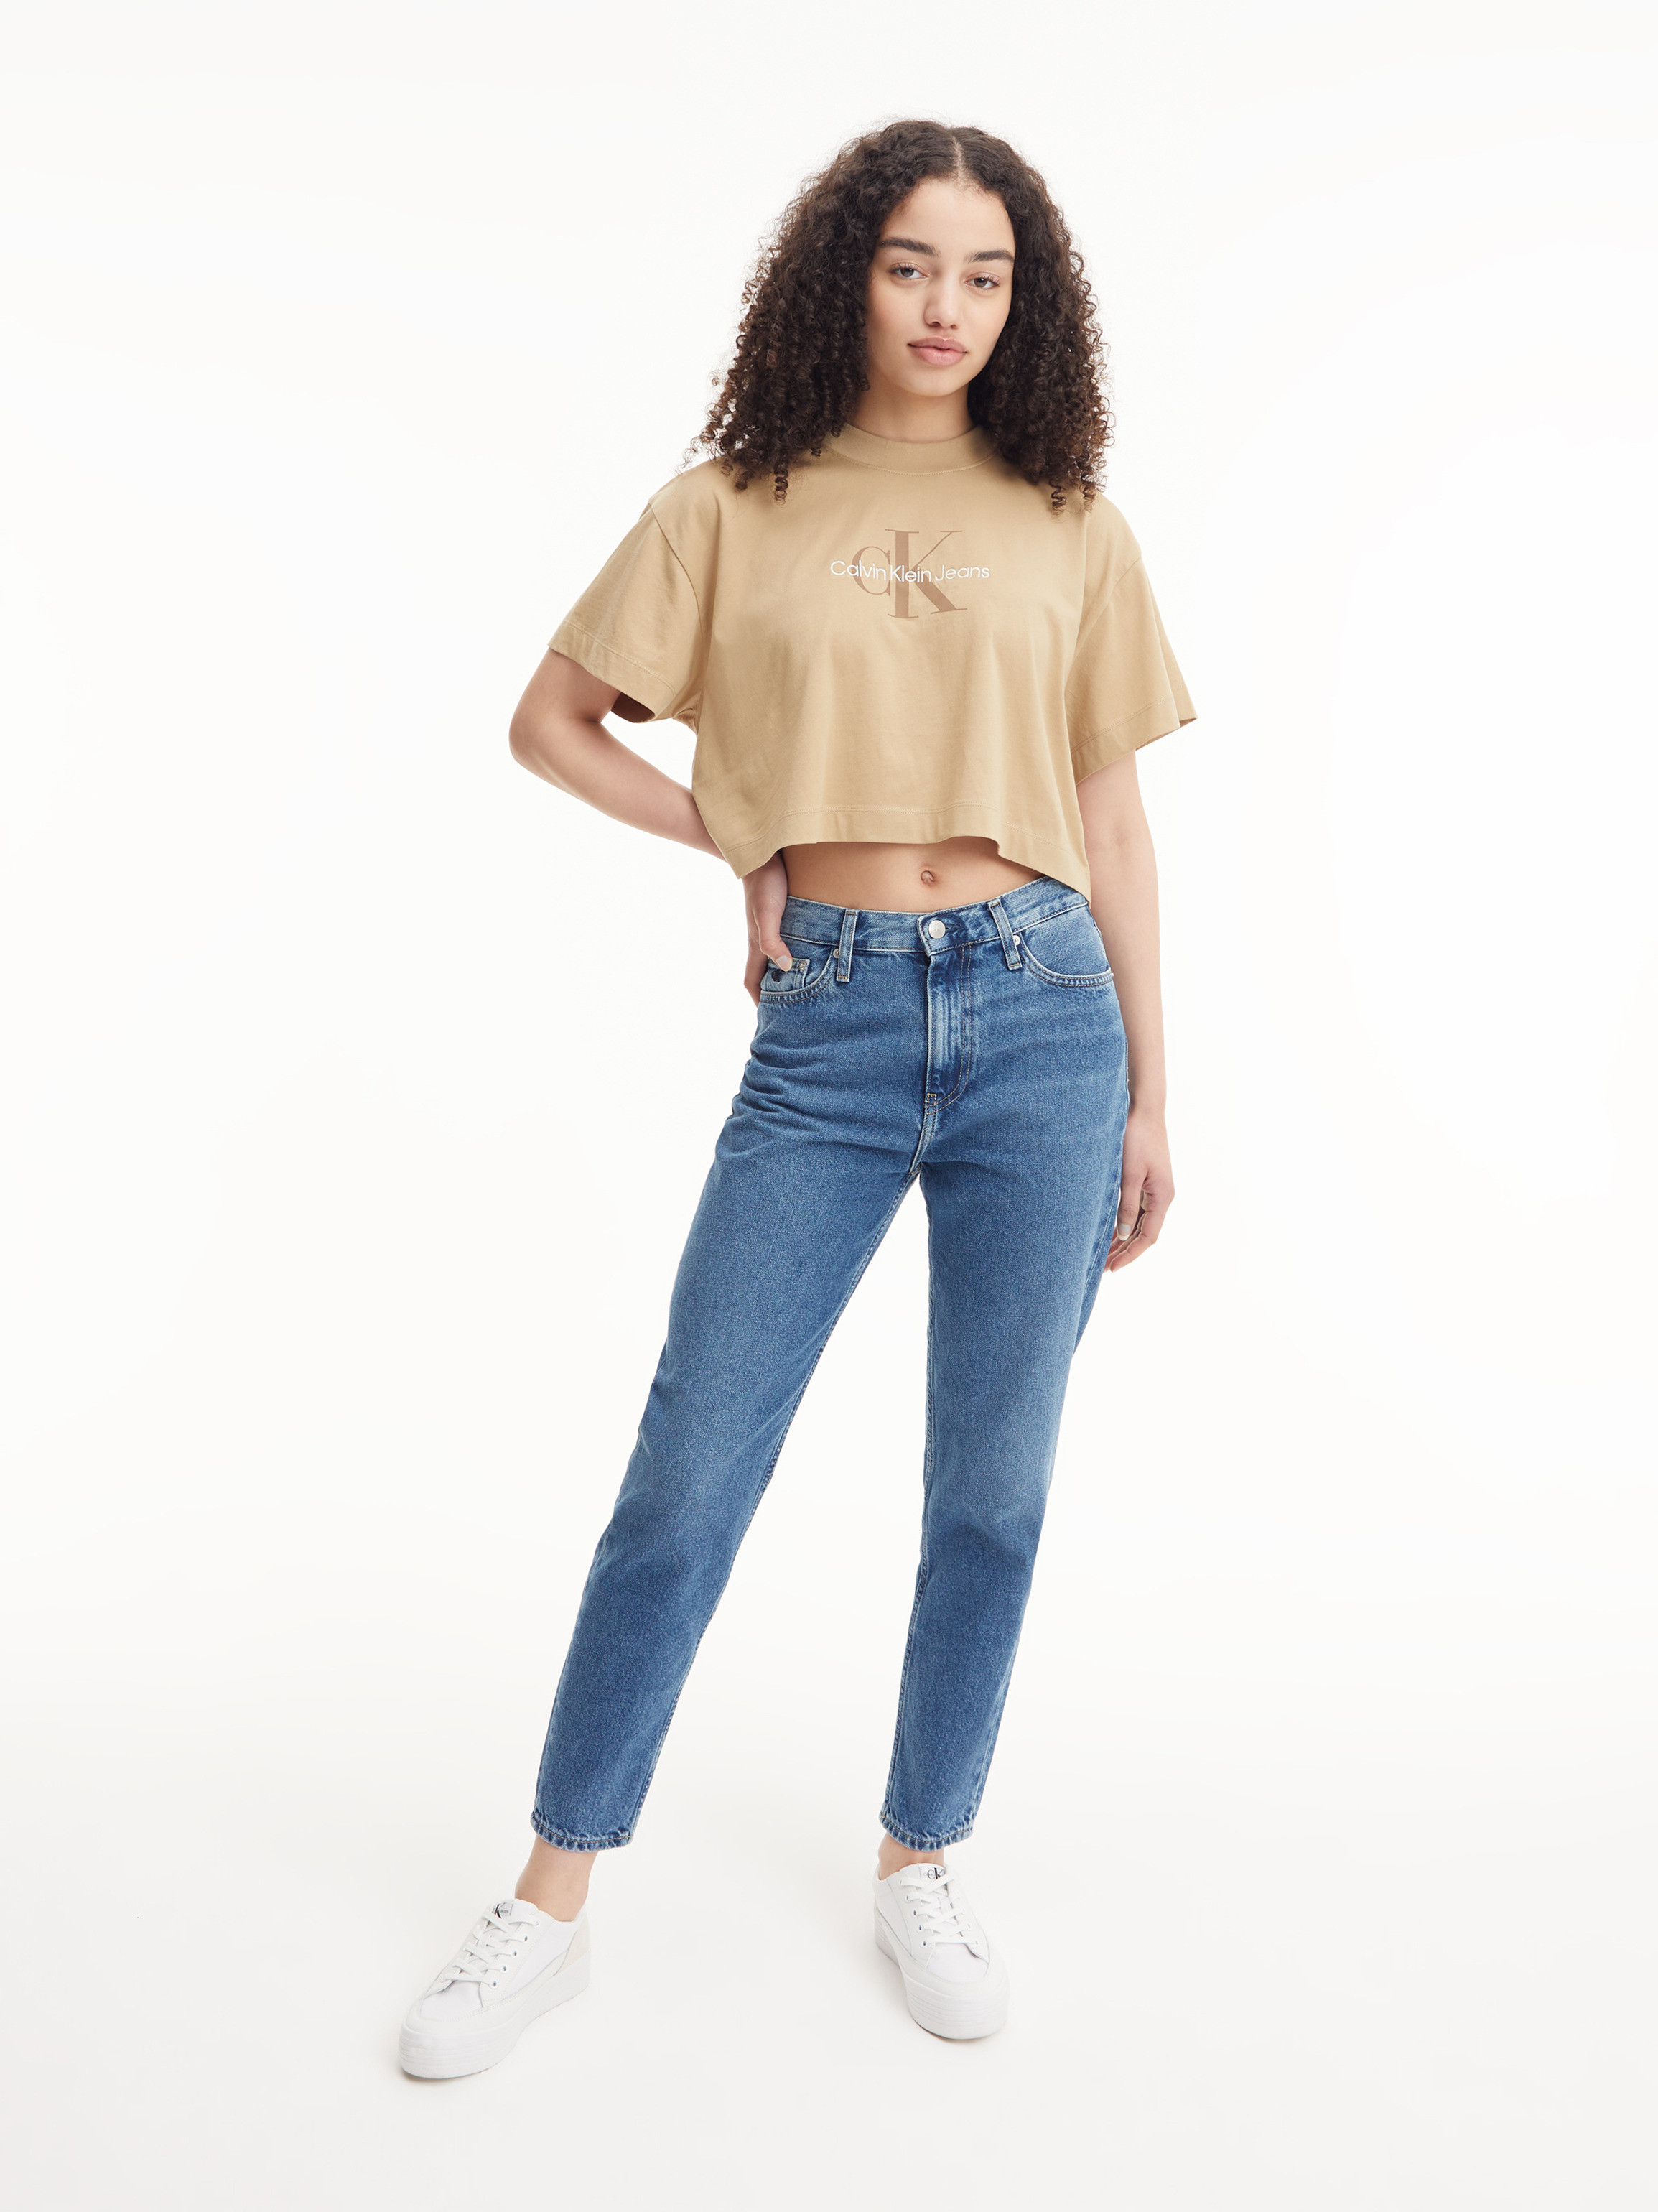 Calvin Klein Jeans - Cotton cropped T-shirt with logo, Beige, large image number 3